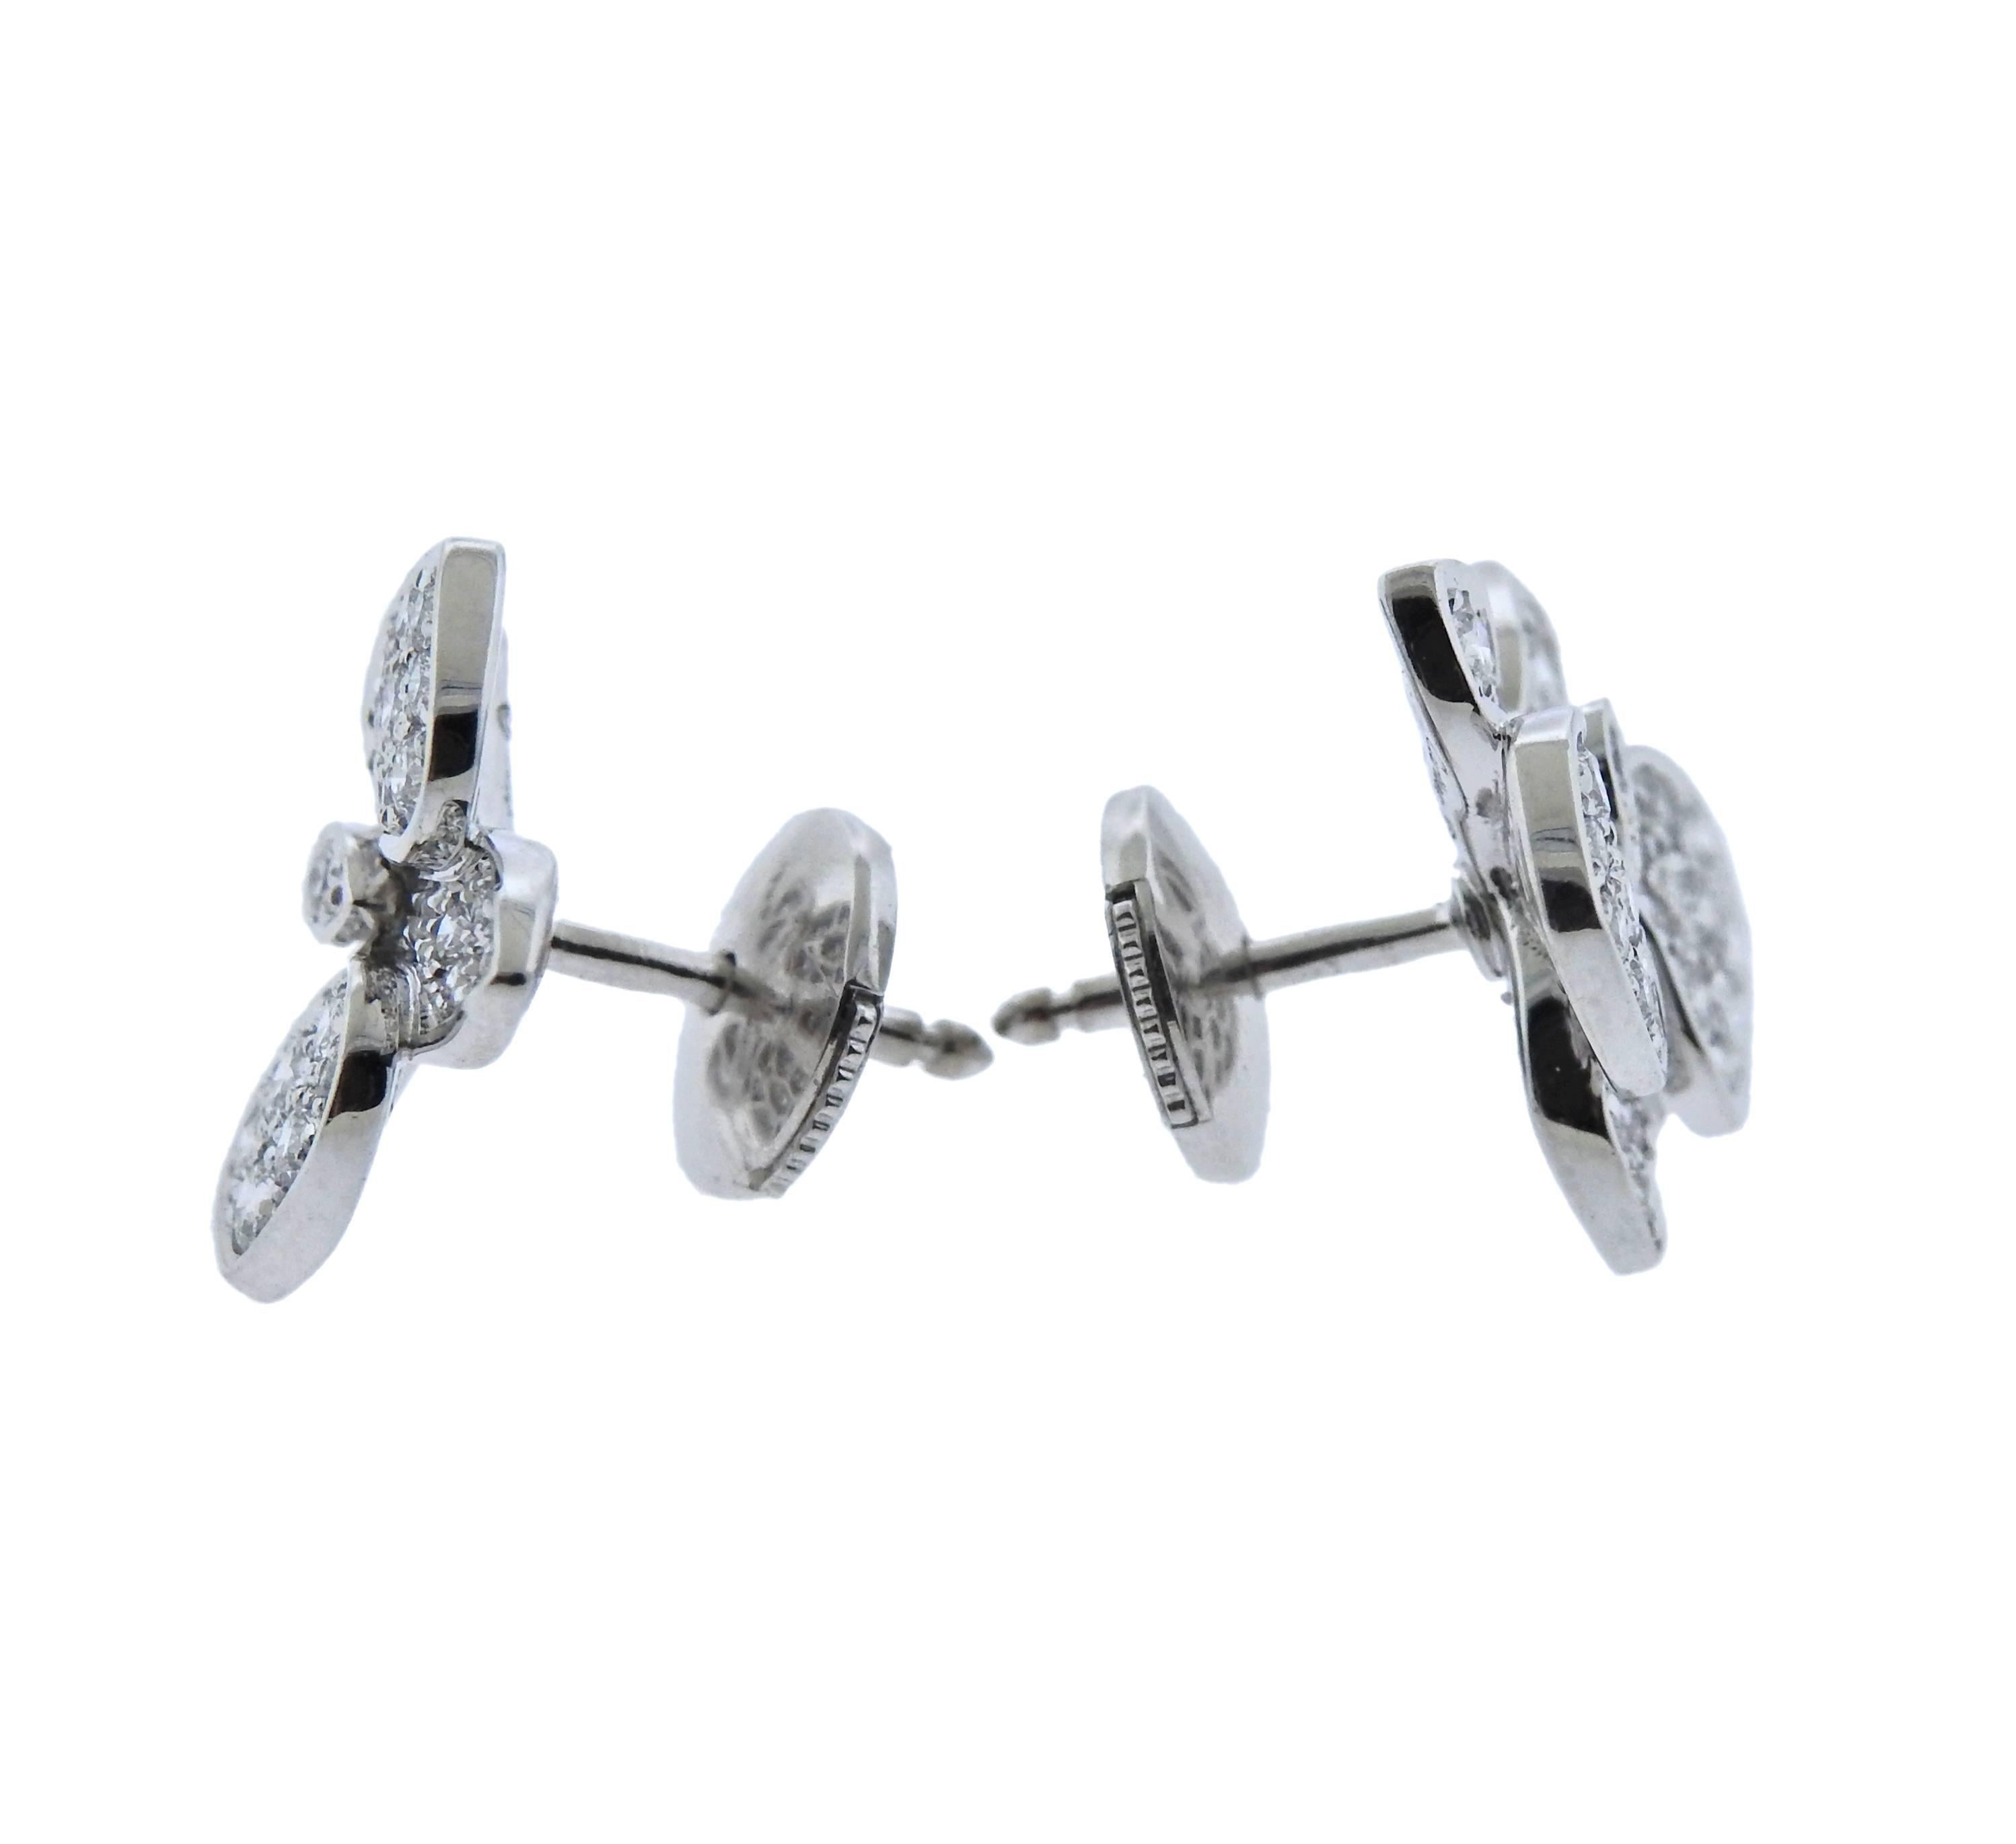 Pair of 18k white gold and diamond earrings, crafted by Cartier for Caresse d'Orchidees collection. Retail $11100. Come with box and COA.  Earrings are 14mm x 14mm, weigh 4.9 grams. Marked: Cartier, 750, OO1878.